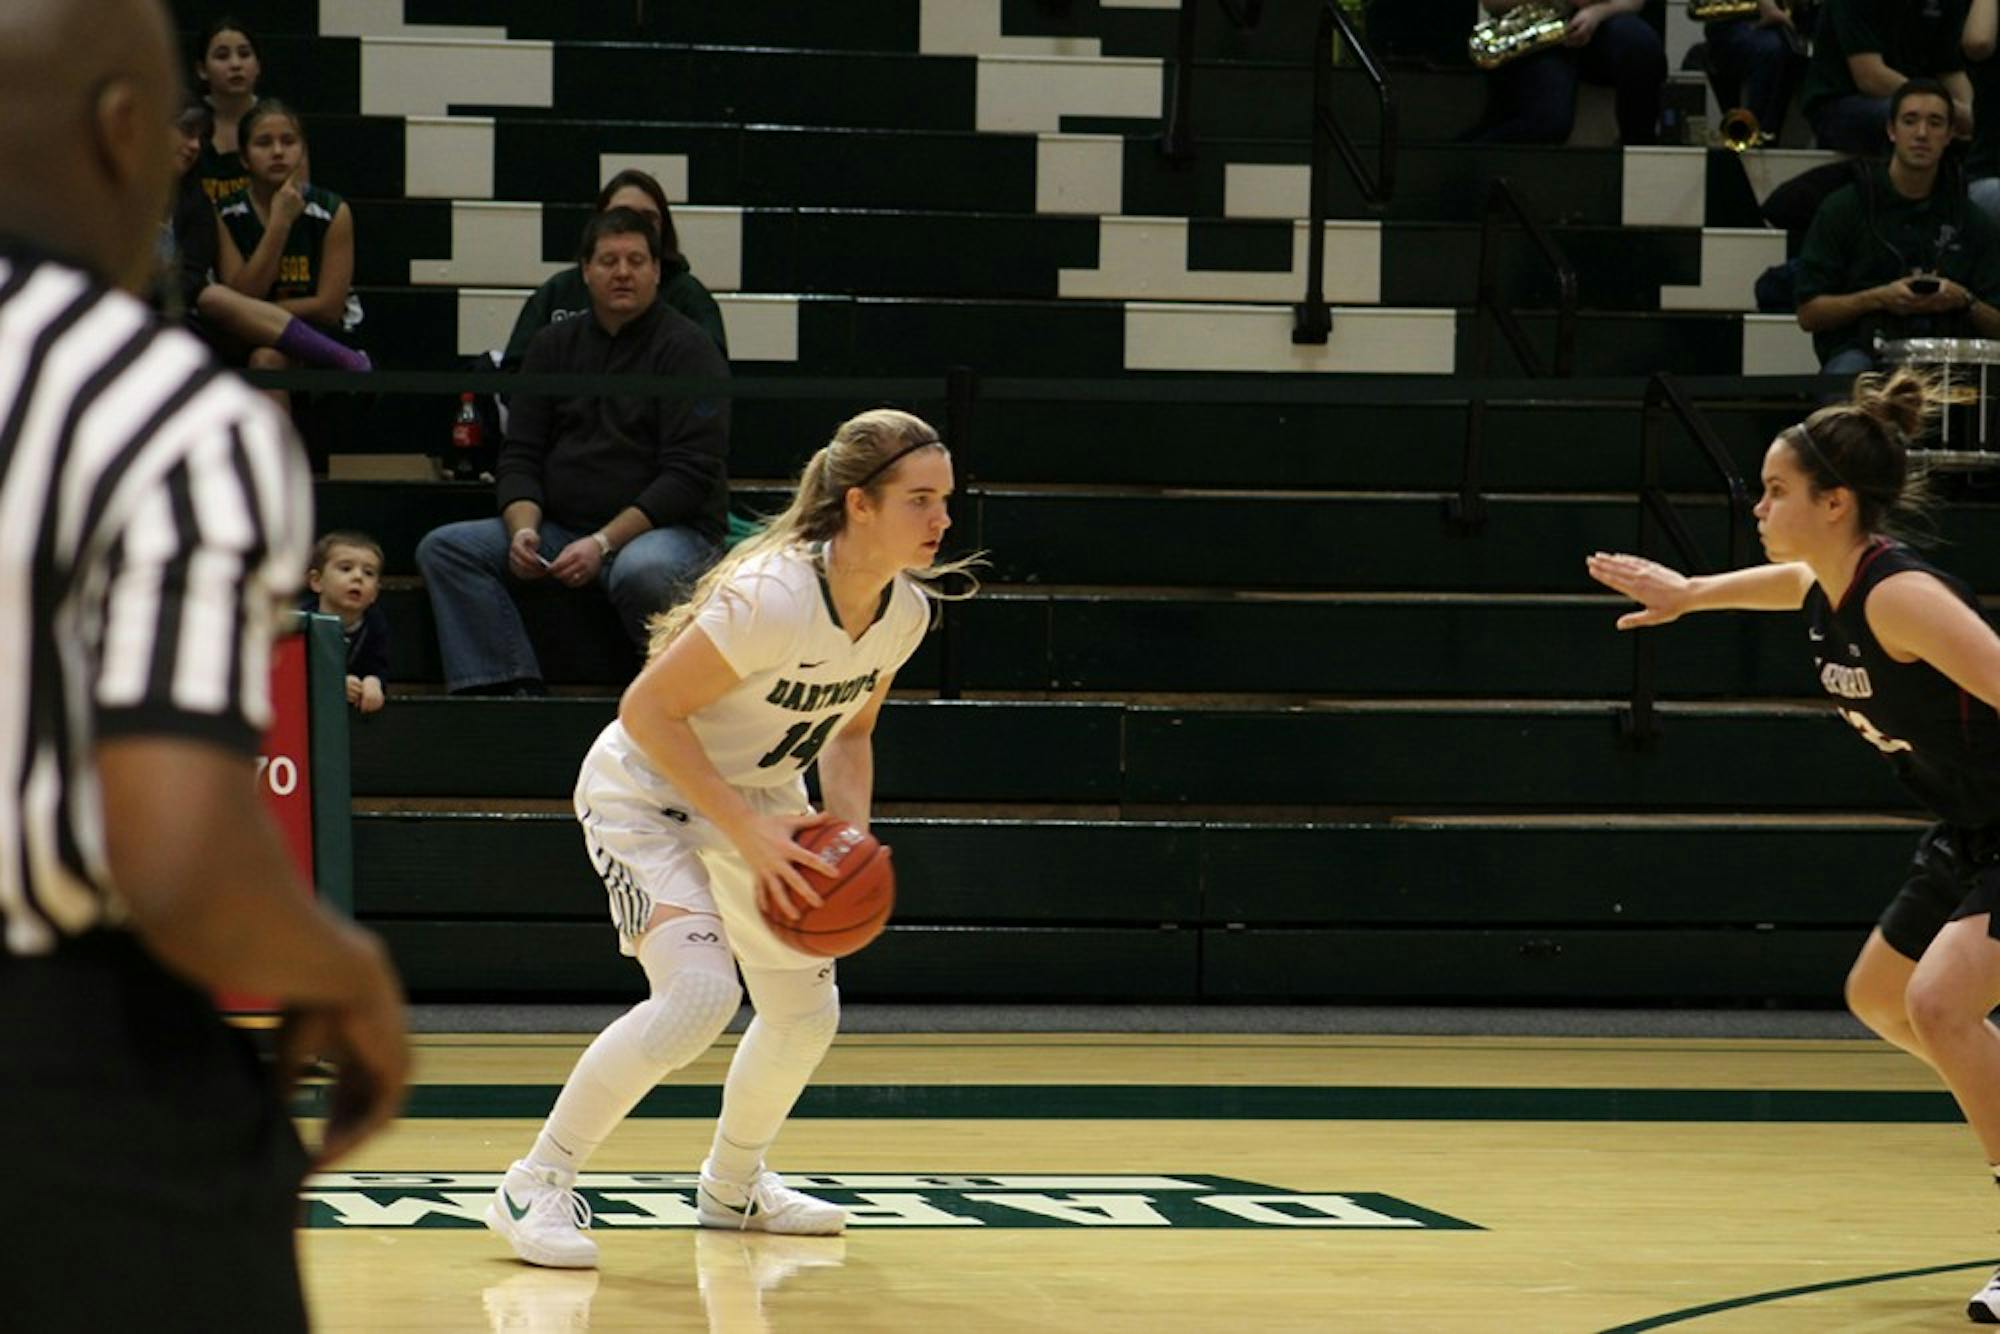 The women's basketball team took both games into overtime this past weekend.